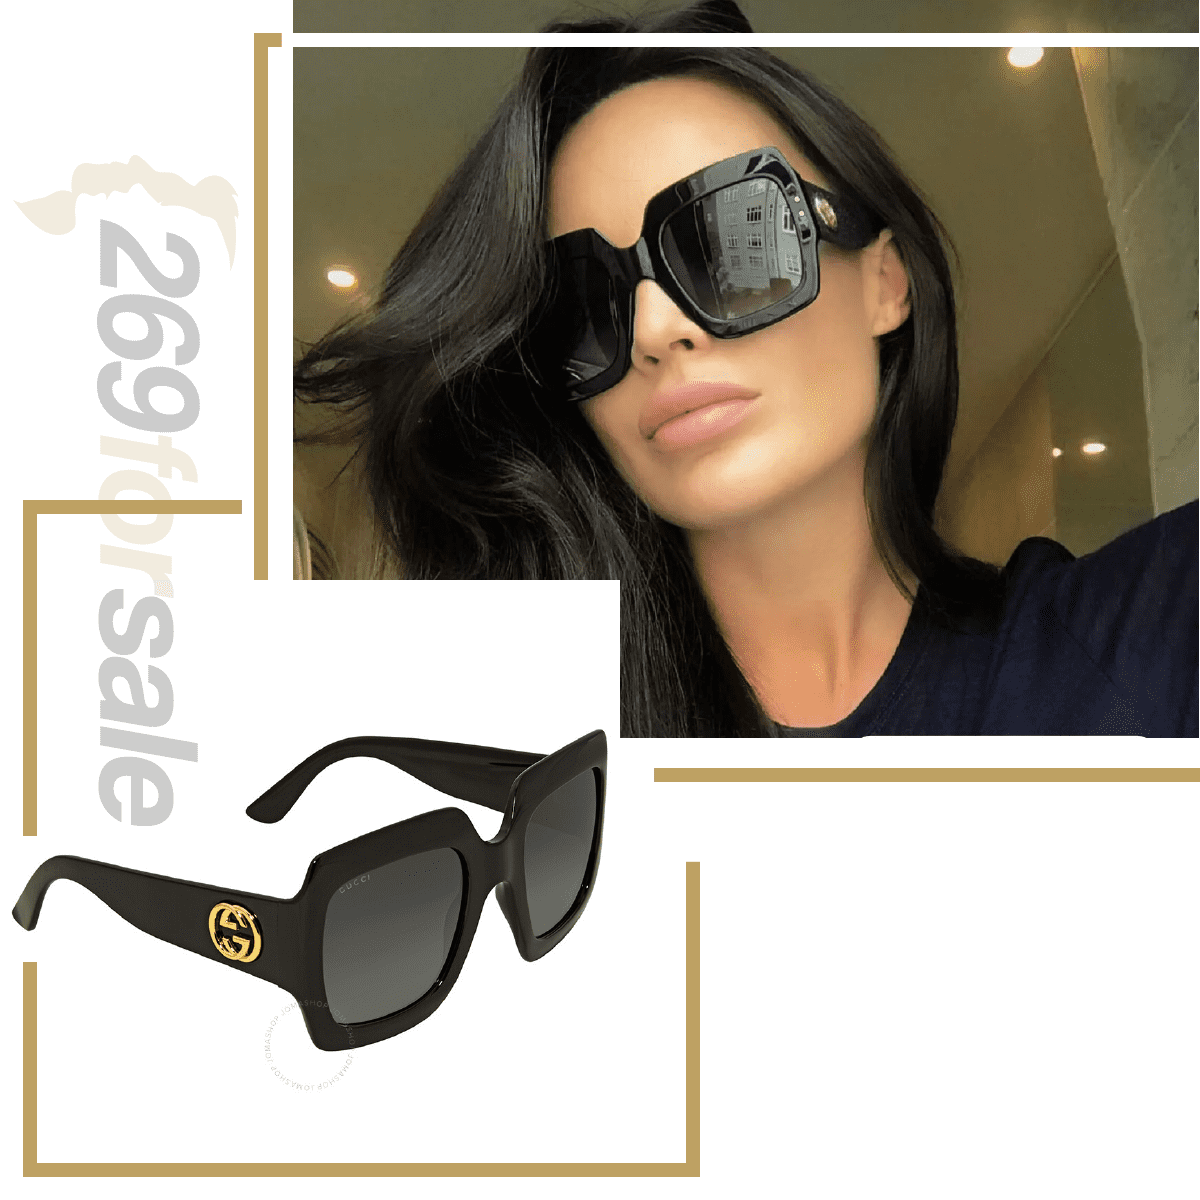 Discount 20% on GG0053S